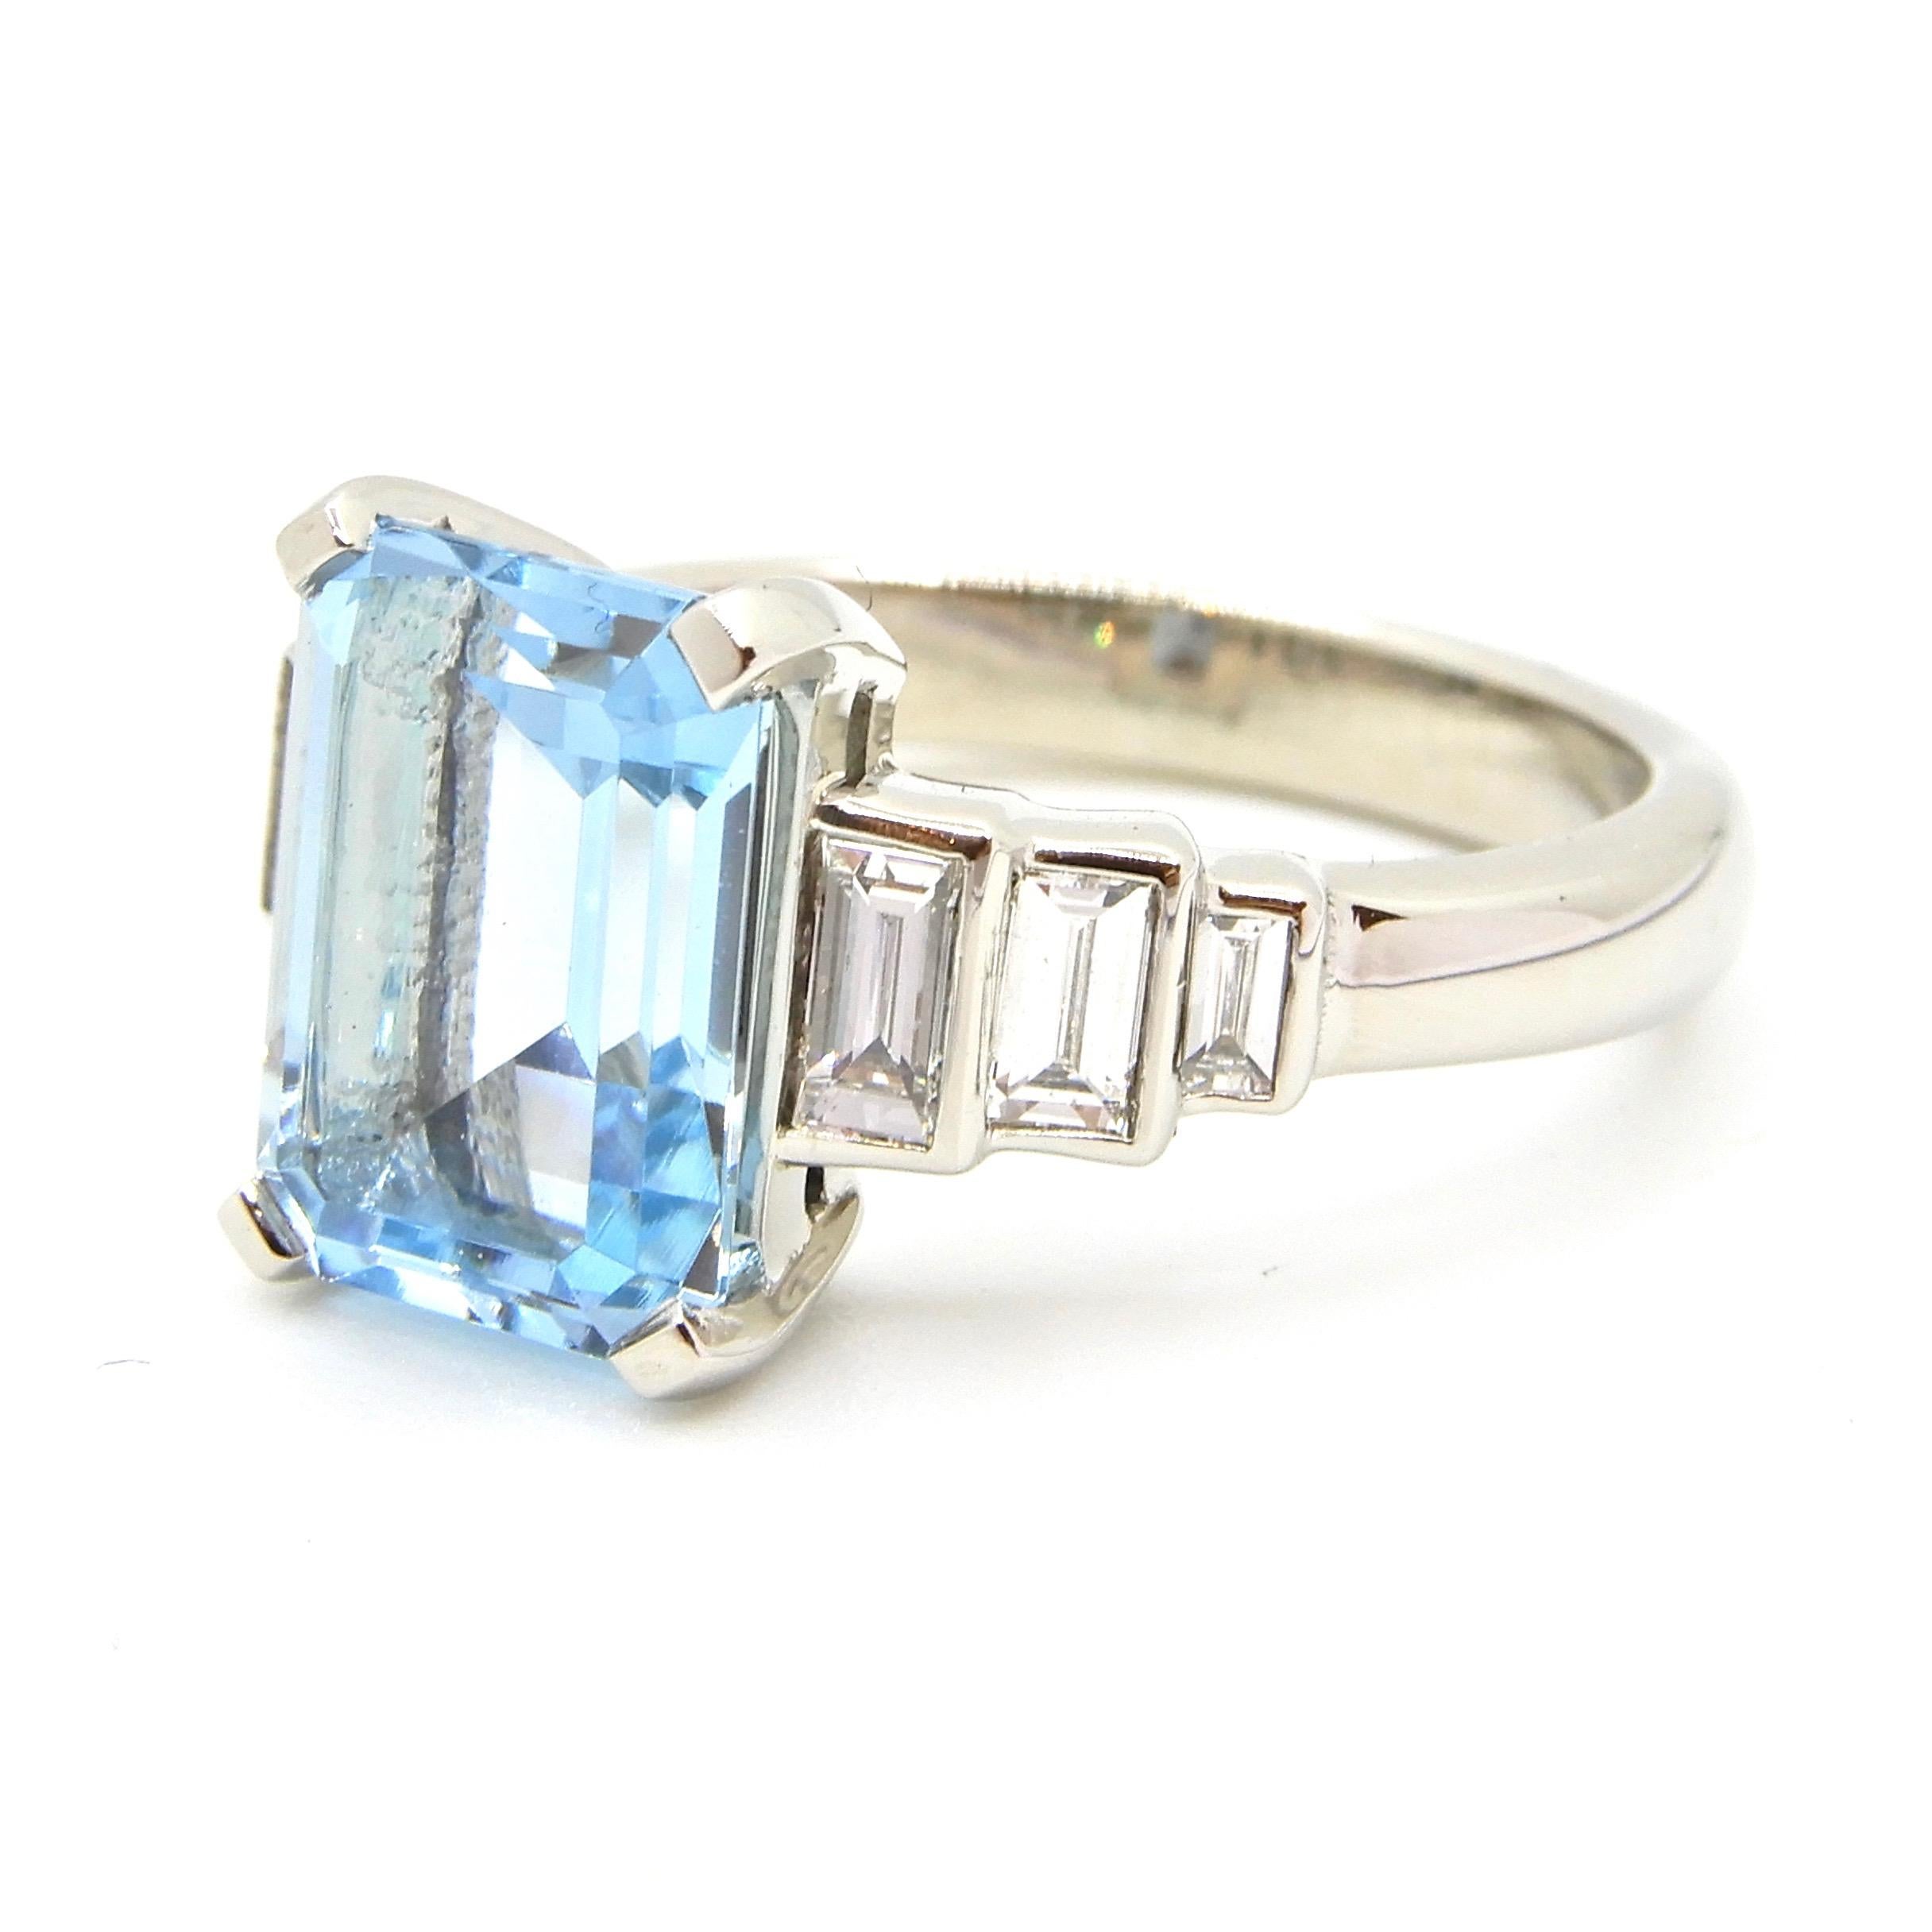 This beautiful 2.5 Carat Emerald Cut Aquamarine Diamond Platinum Ring is a truly classic piece. Designed with empire lines and steps in mind, the bezel set baguette diamonds really show off the centrepiece emerald cut Aquamarine to its full